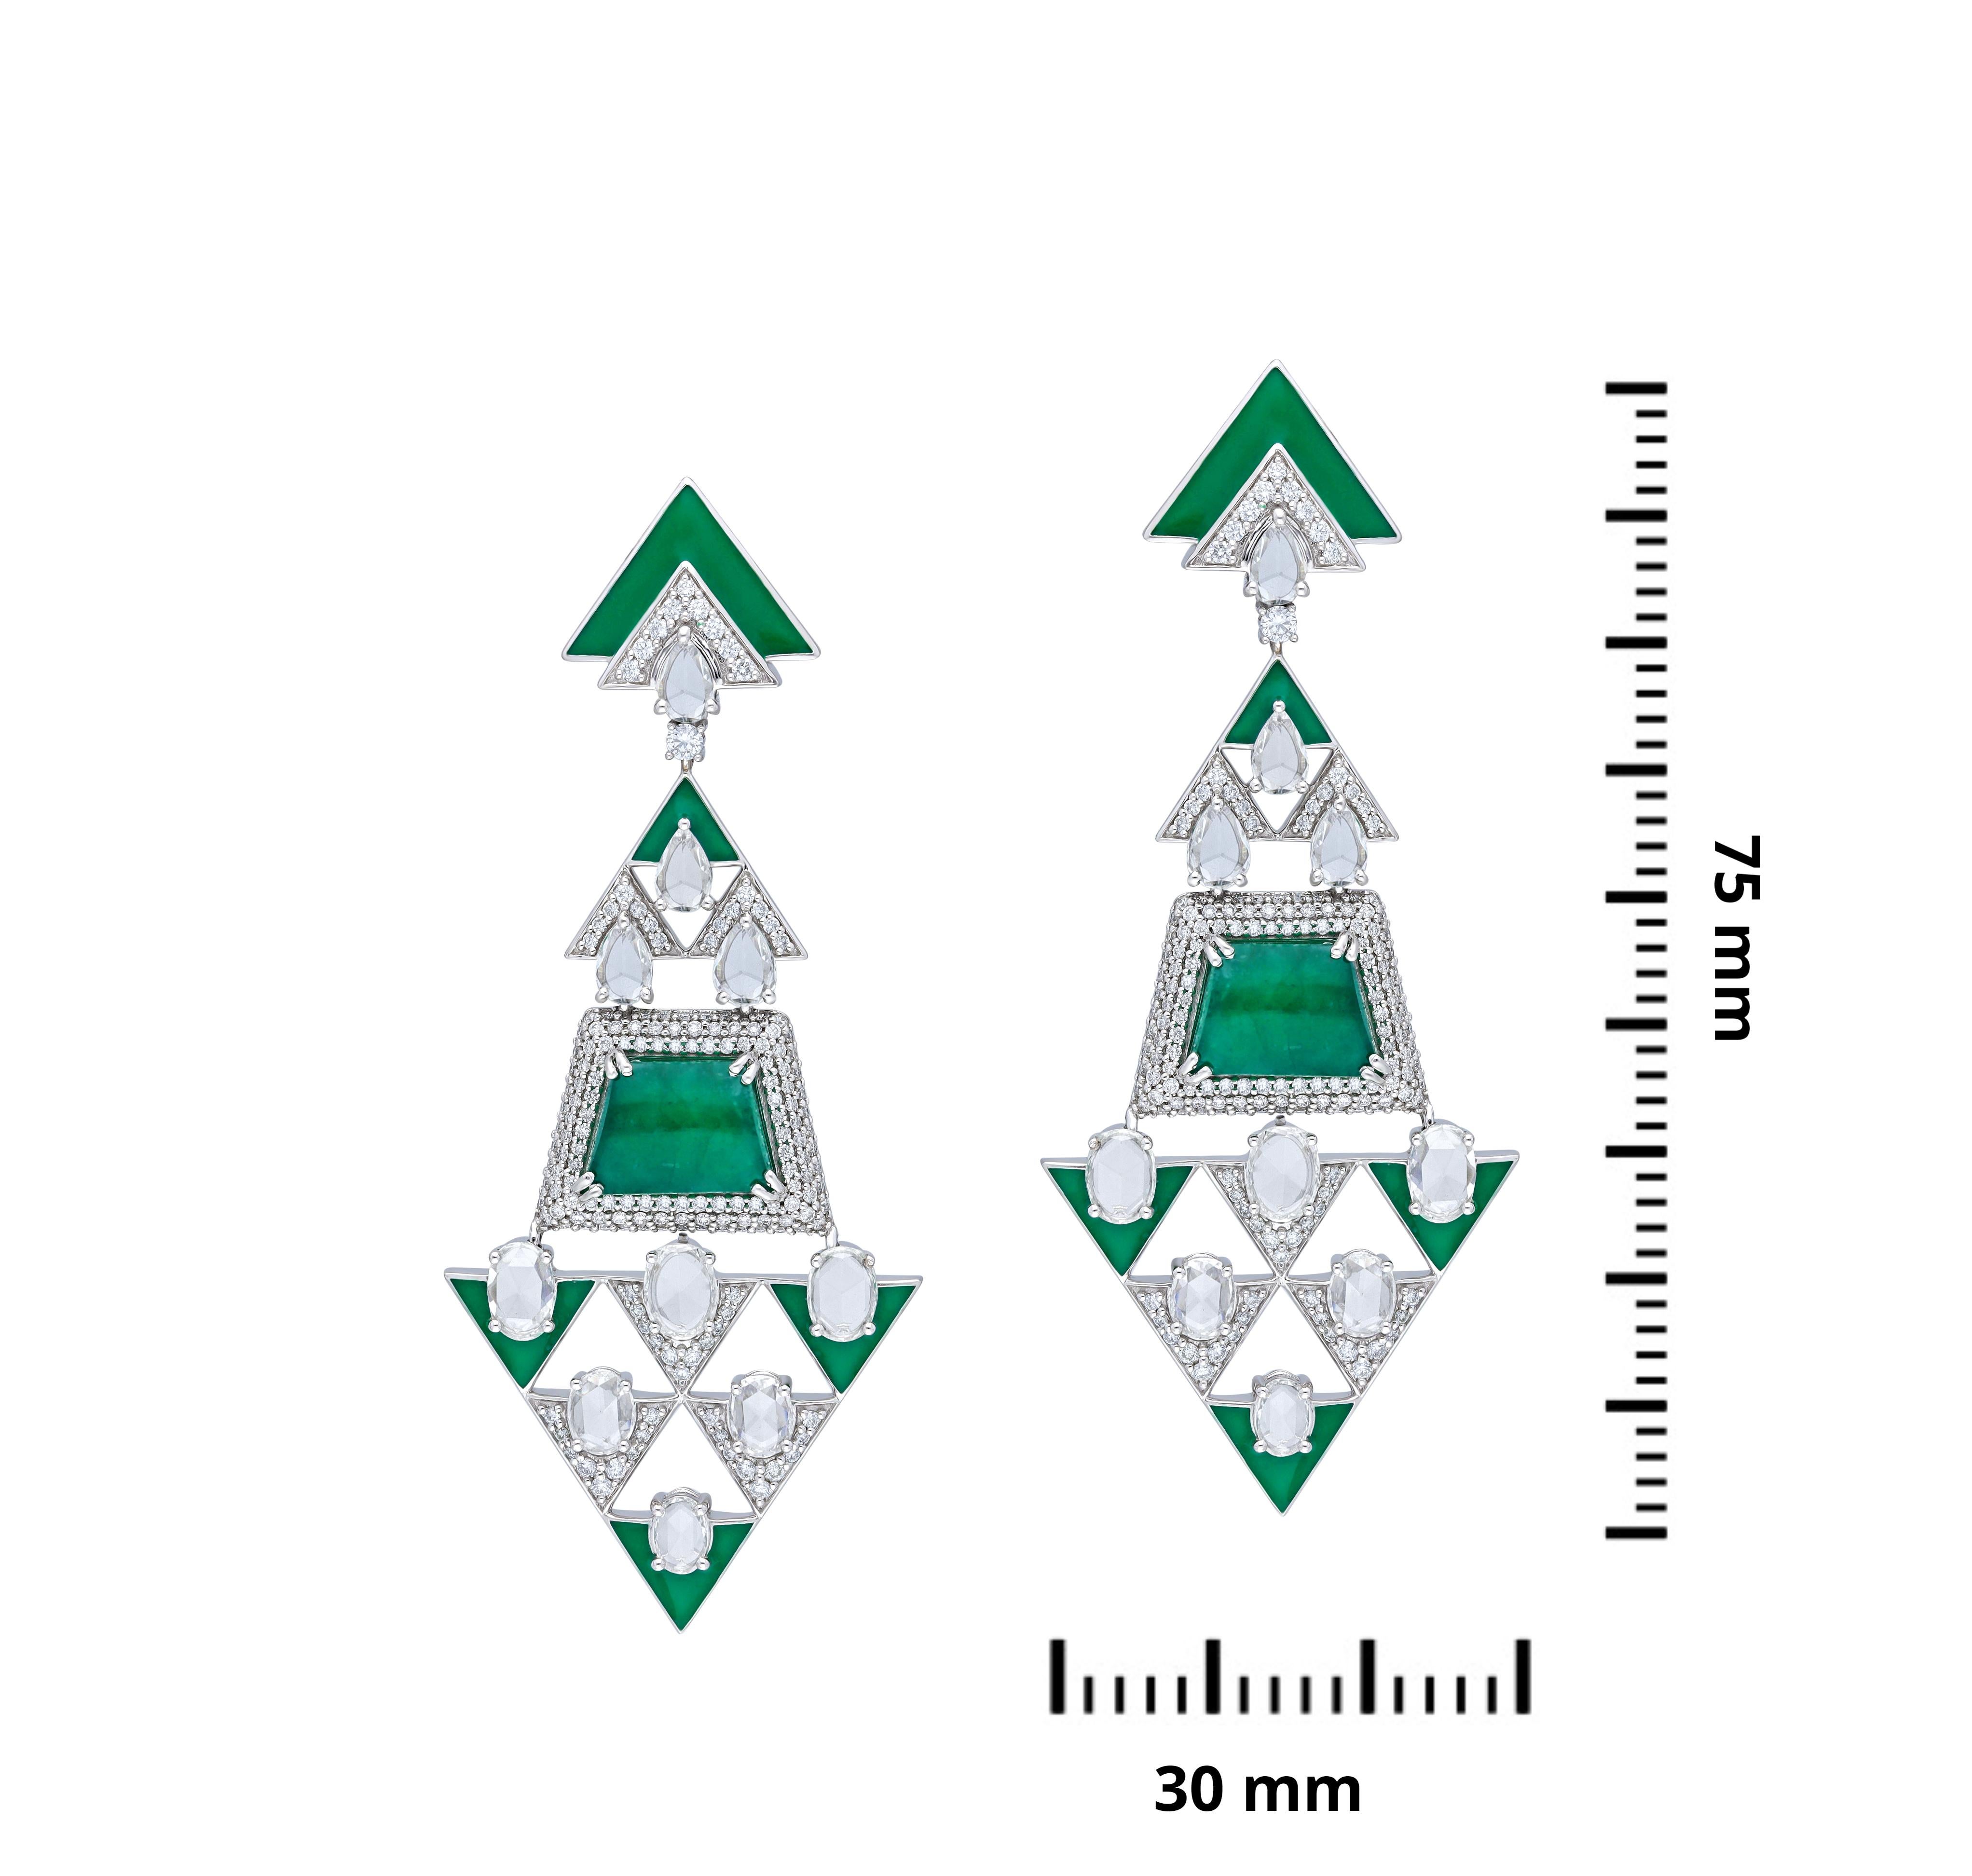 A pair of long earrings in couture cut emerald cabochons with rose & full cut white diamonds.  Mirroring a geometric façade in a triangular pattern of oval rose cut diamonds with emerald cabochons & triangular edges of green enamel, all mounted on a